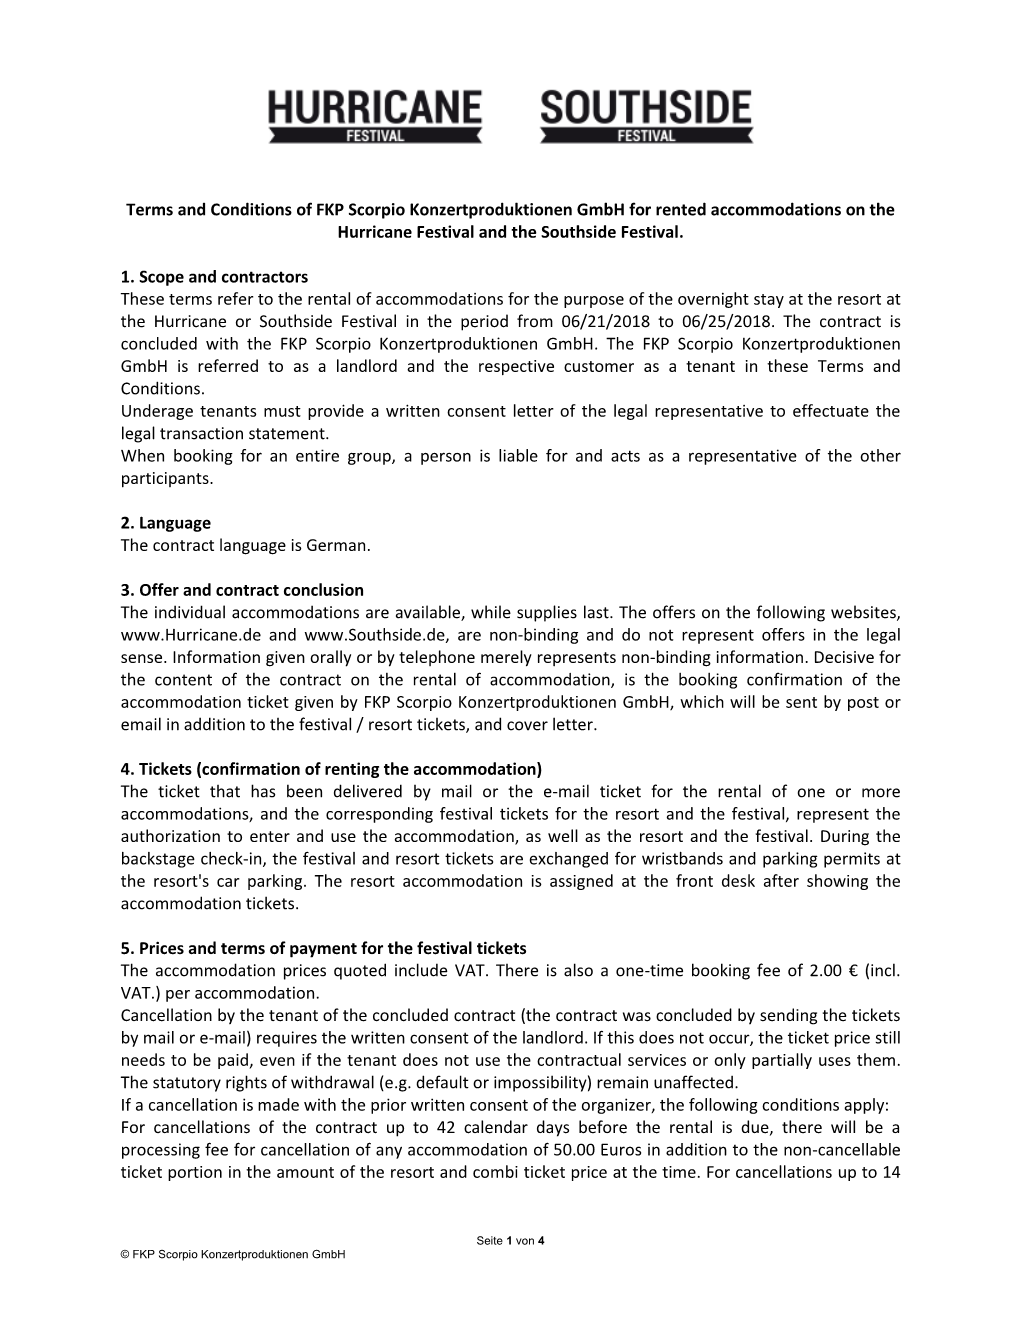 Terms and Conditions of FKP Scorpio Konzertproduktionen Gmbh for Rented Accommodations on the Hurricane Festival and the Southside Festival